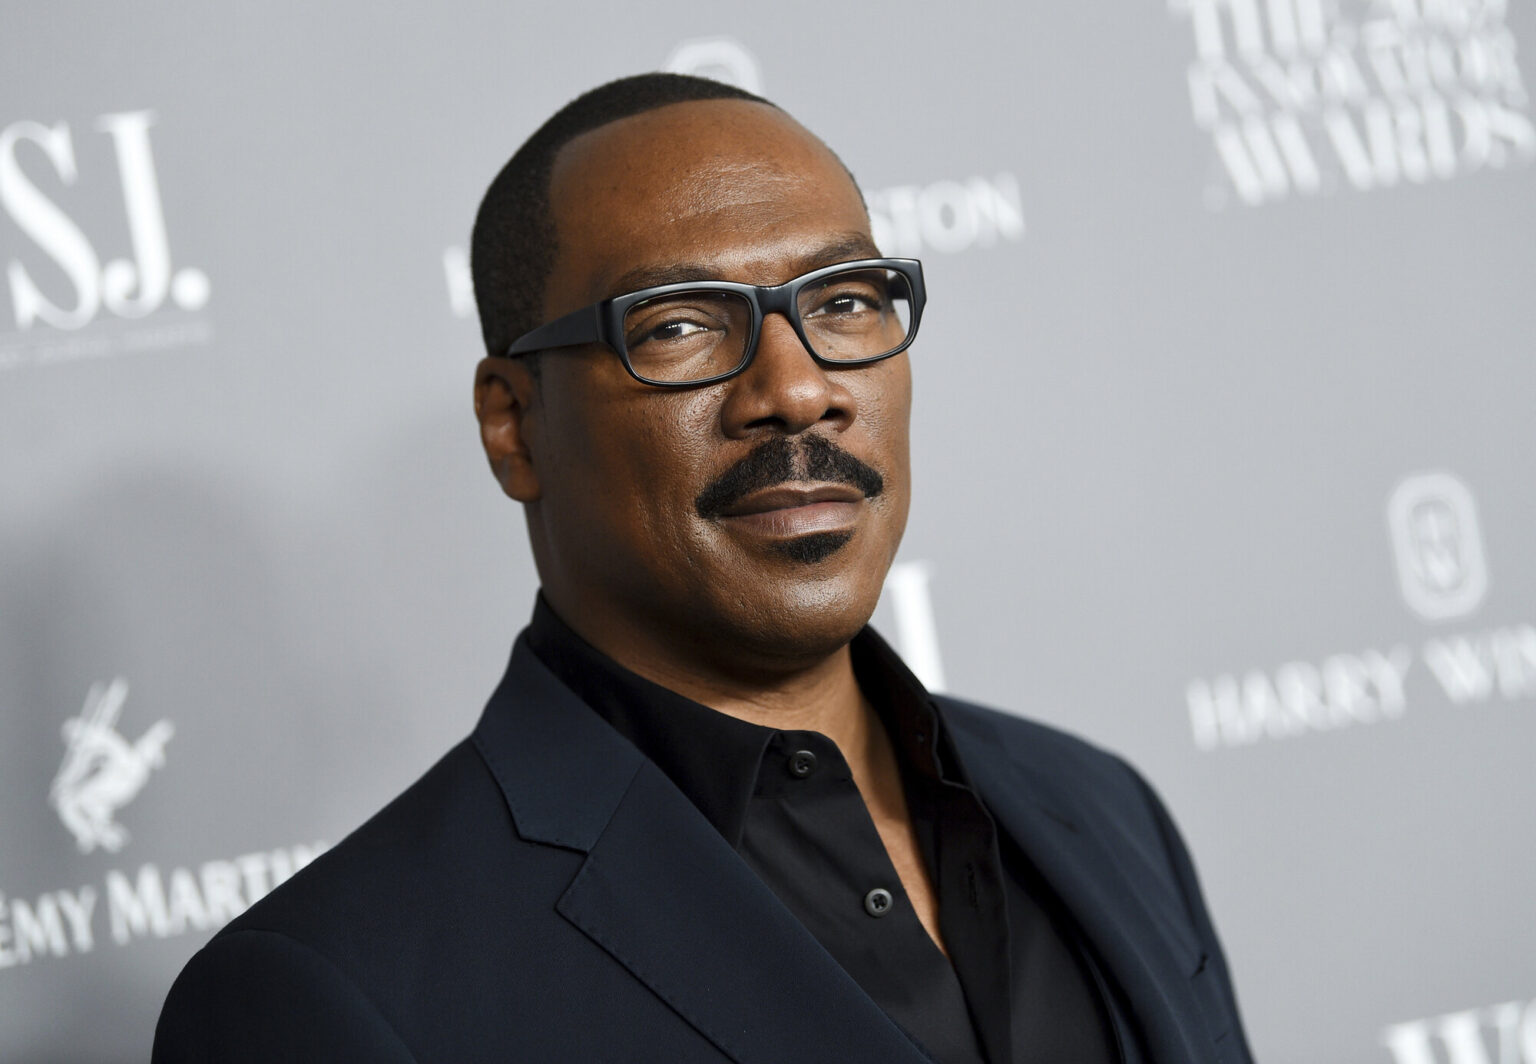 Is Eddie Murphy officially done with making movies, or will he still be continuing his legacy? Remember all his best (and worst) film moments here.